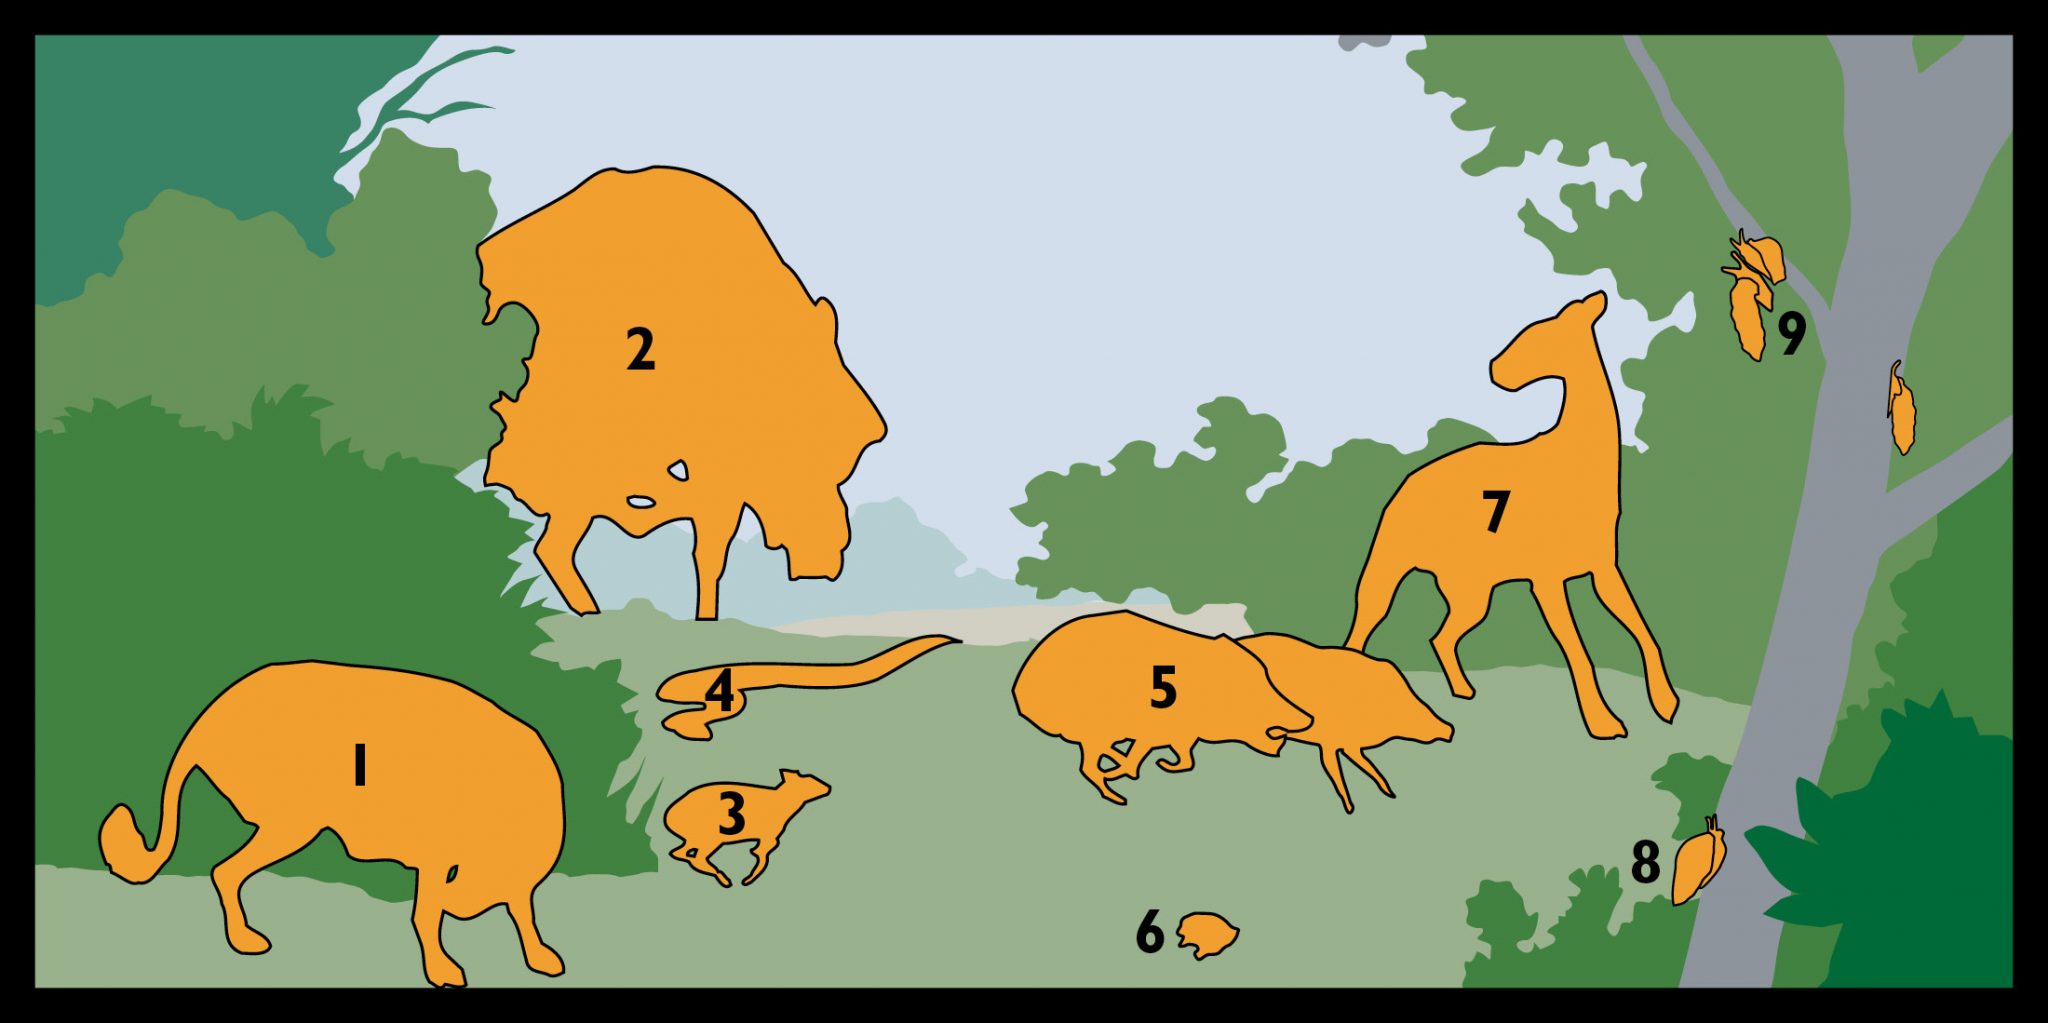 Illustration showing Oligocene scene with each animal and some plants only a numbered shape